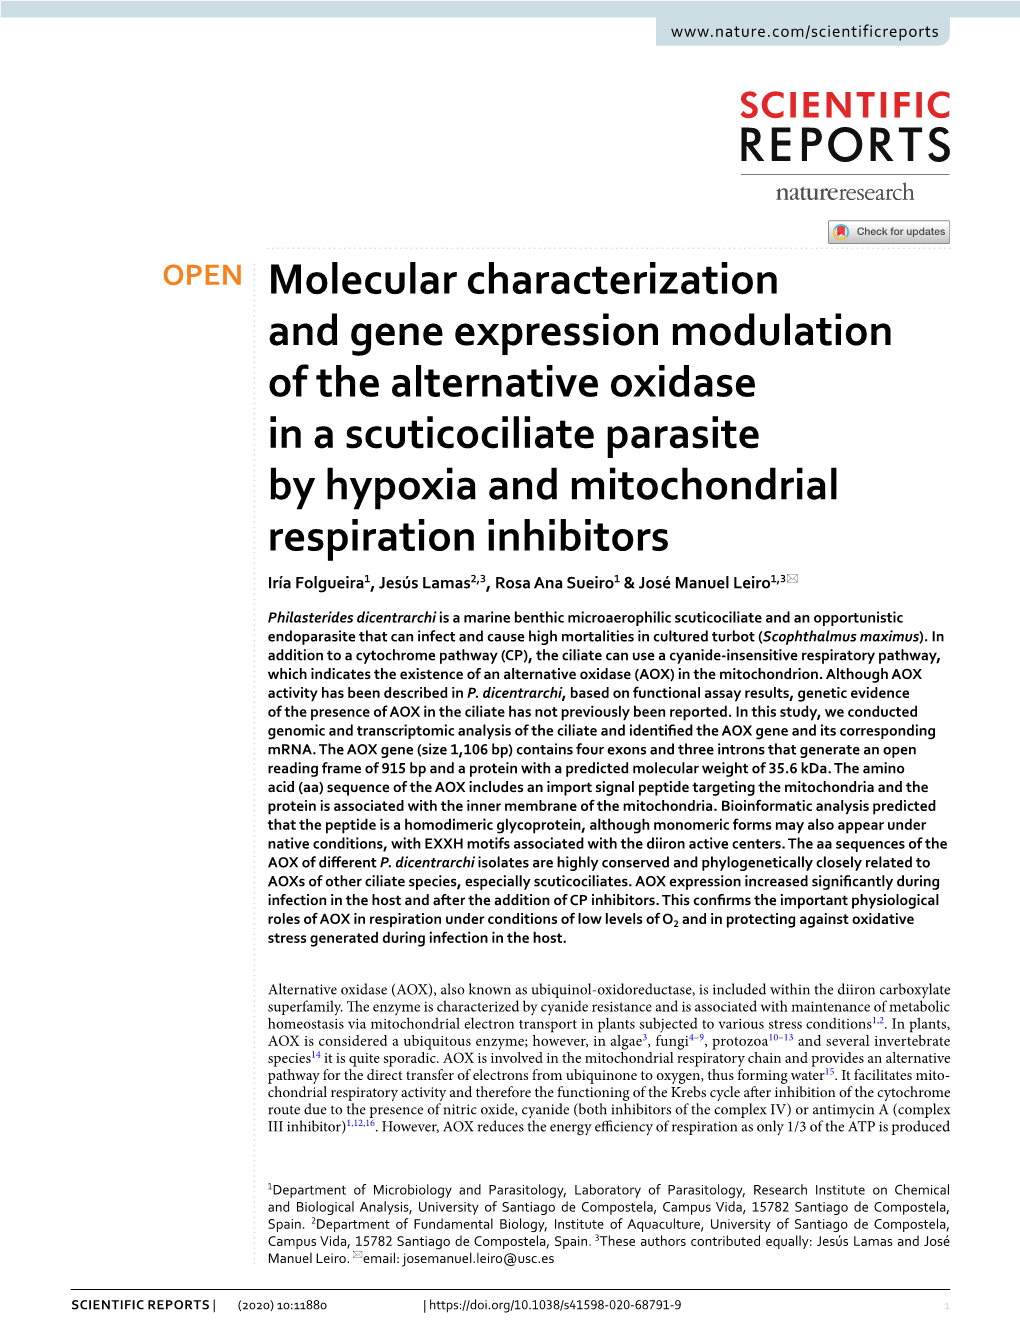 Molecular Characterization and Gene Expression Modulation Of